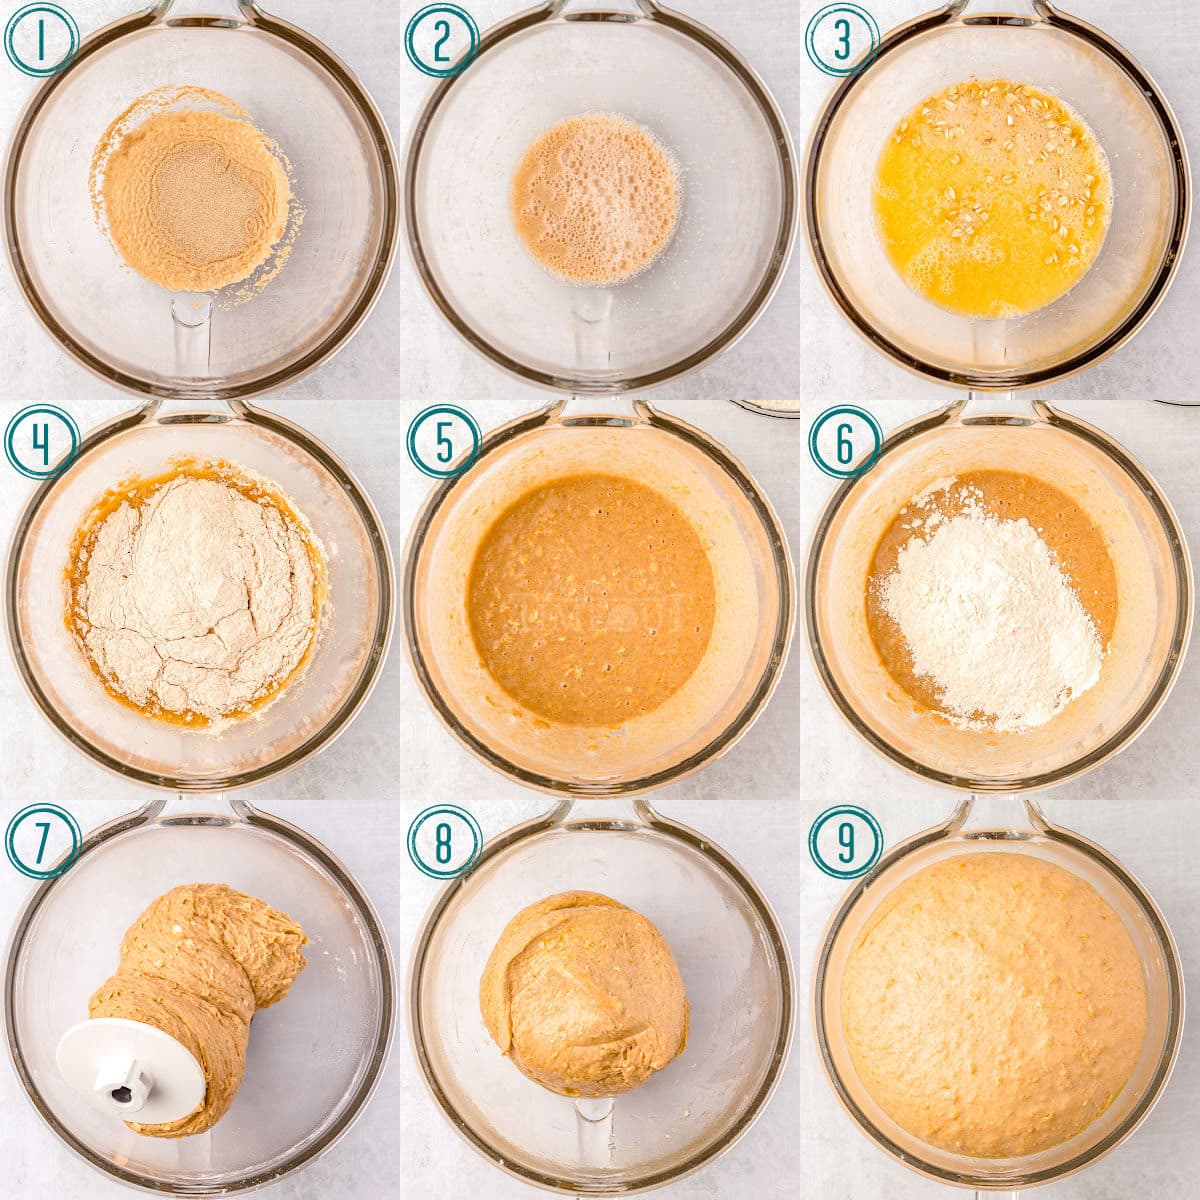 nine image collage showing how to make whole wheat bread dough in a glass bowl.